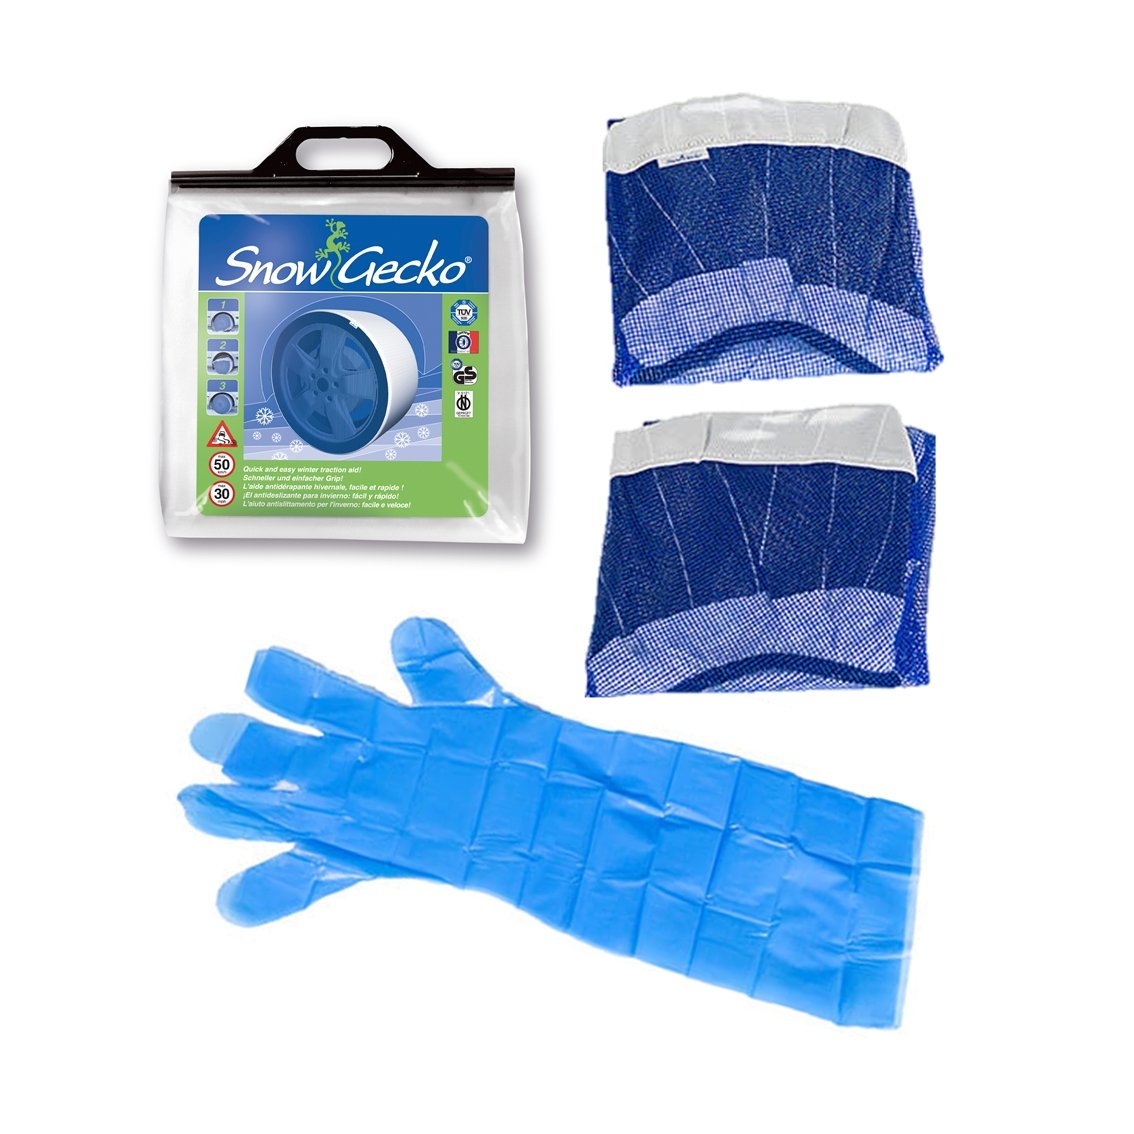 SnowGecko Small bag includes a pair of tire socks and gloves